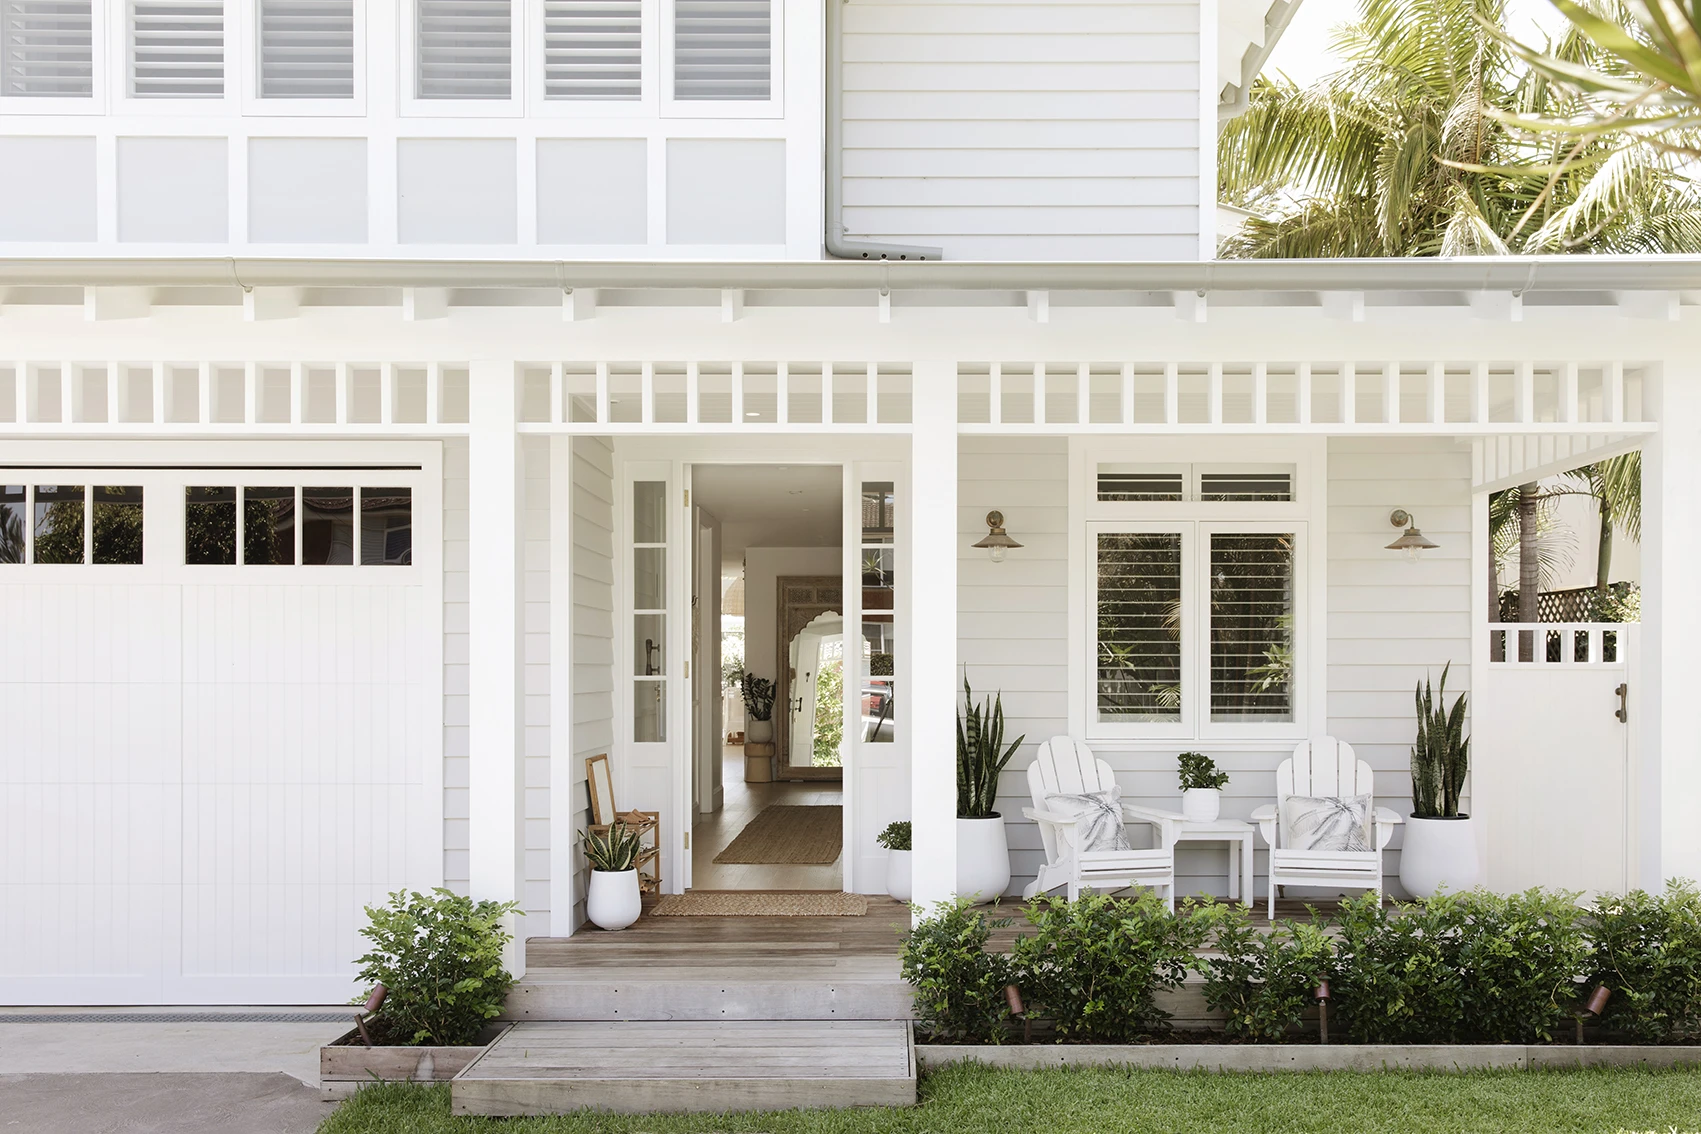 White and grey weatherboard double-storey house